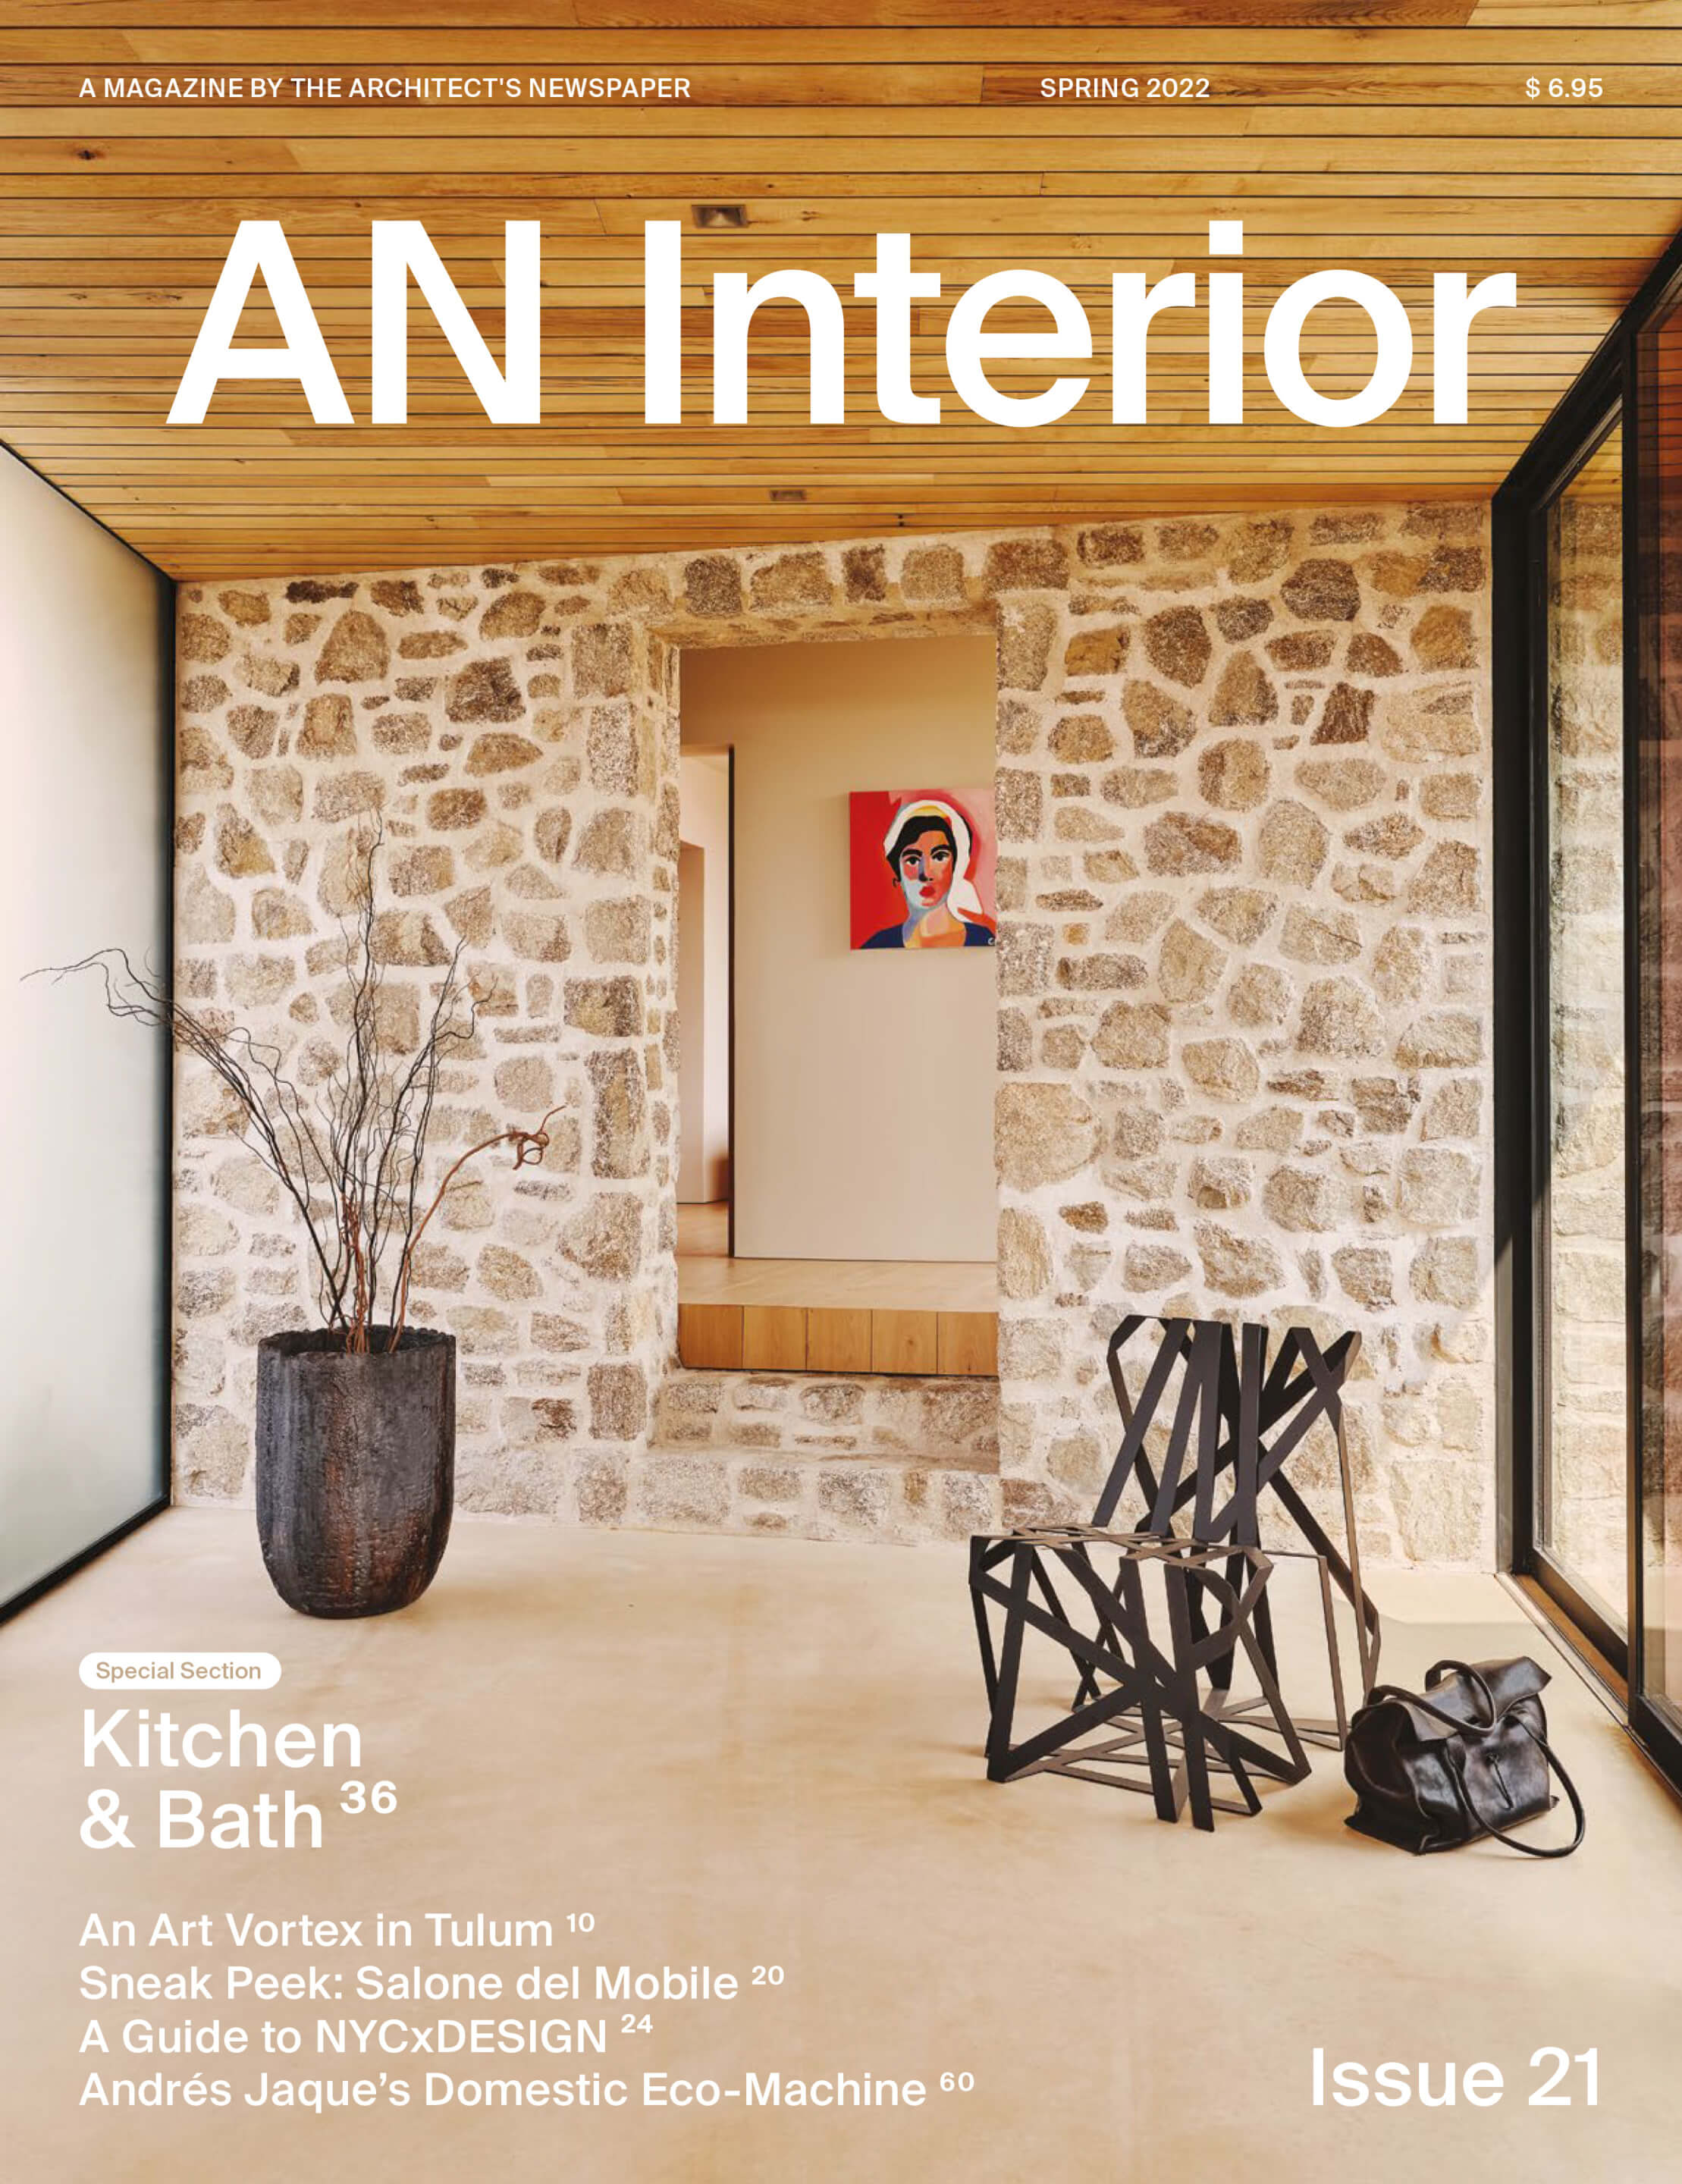 Cover of AN Interior magazine with chair, stone wall, and wood ceiling